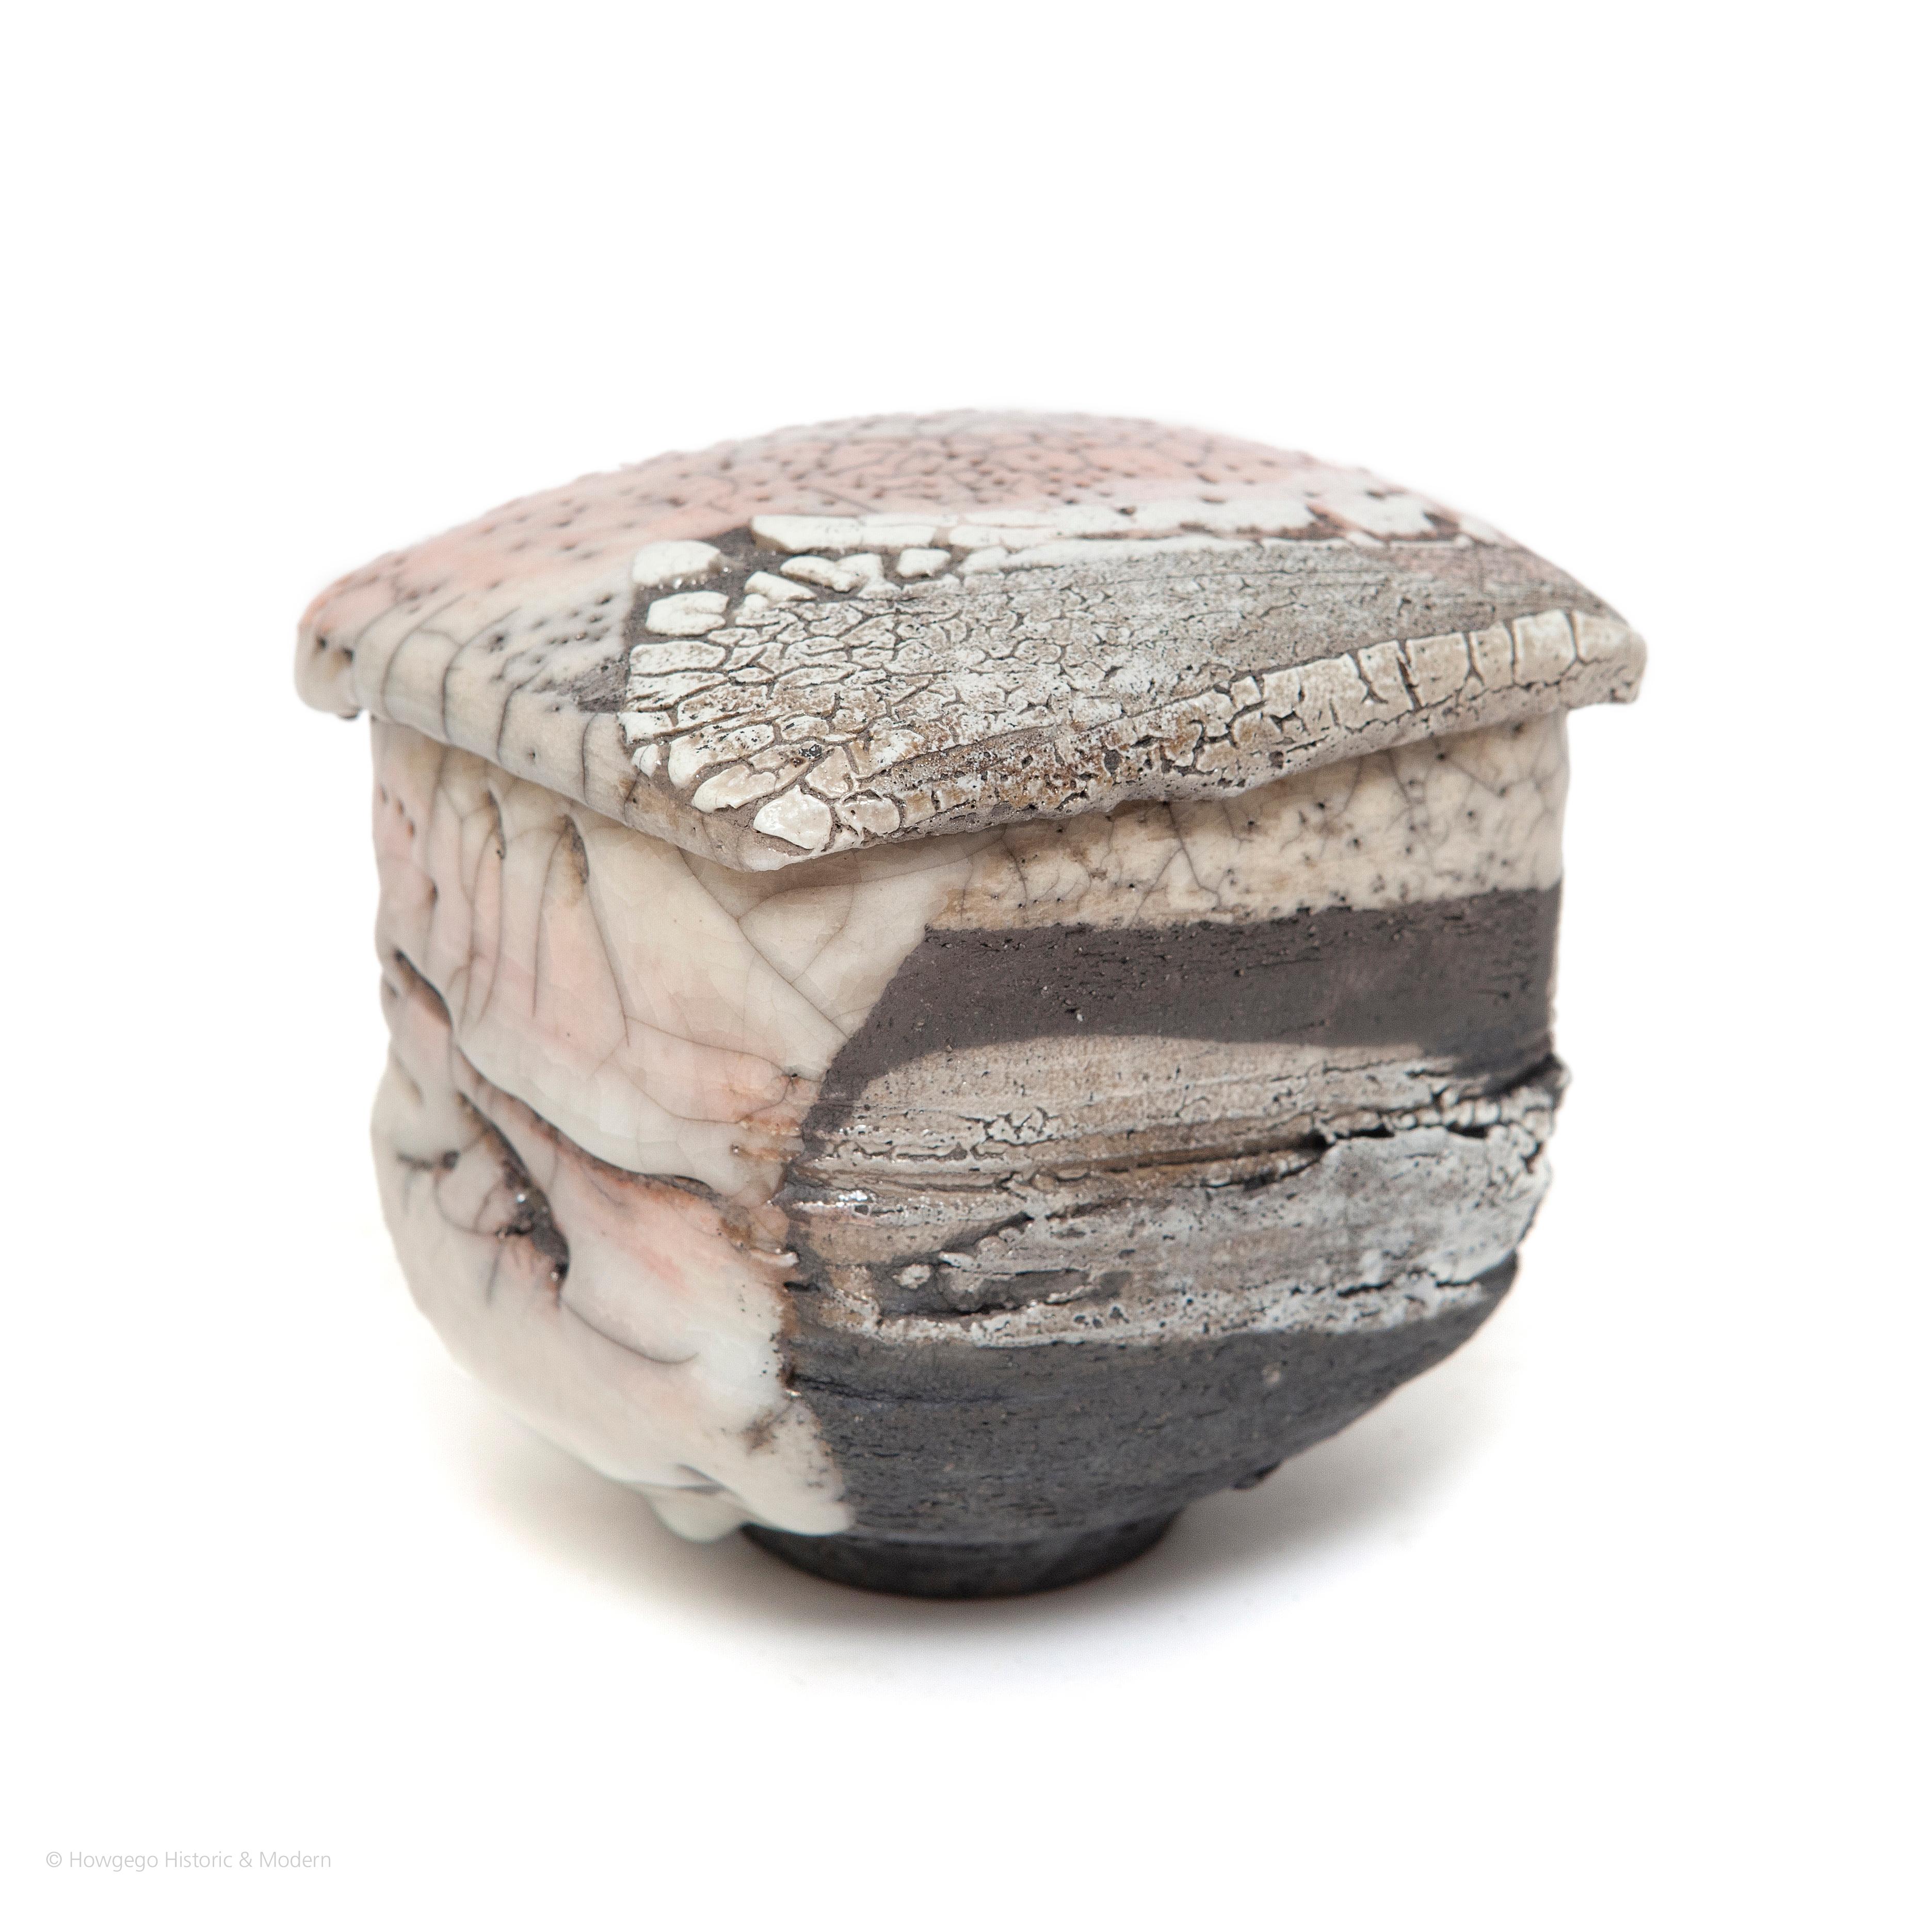 Christoph Zange : Black Raku, ceremonal tea bowl & cover or storage vessel

Raku tea bowls are made by moulding pinching, sculpting by hand; glazing by brush and firing in a muffle kiln fuelled by charcoal removing them from the hot kiln so they